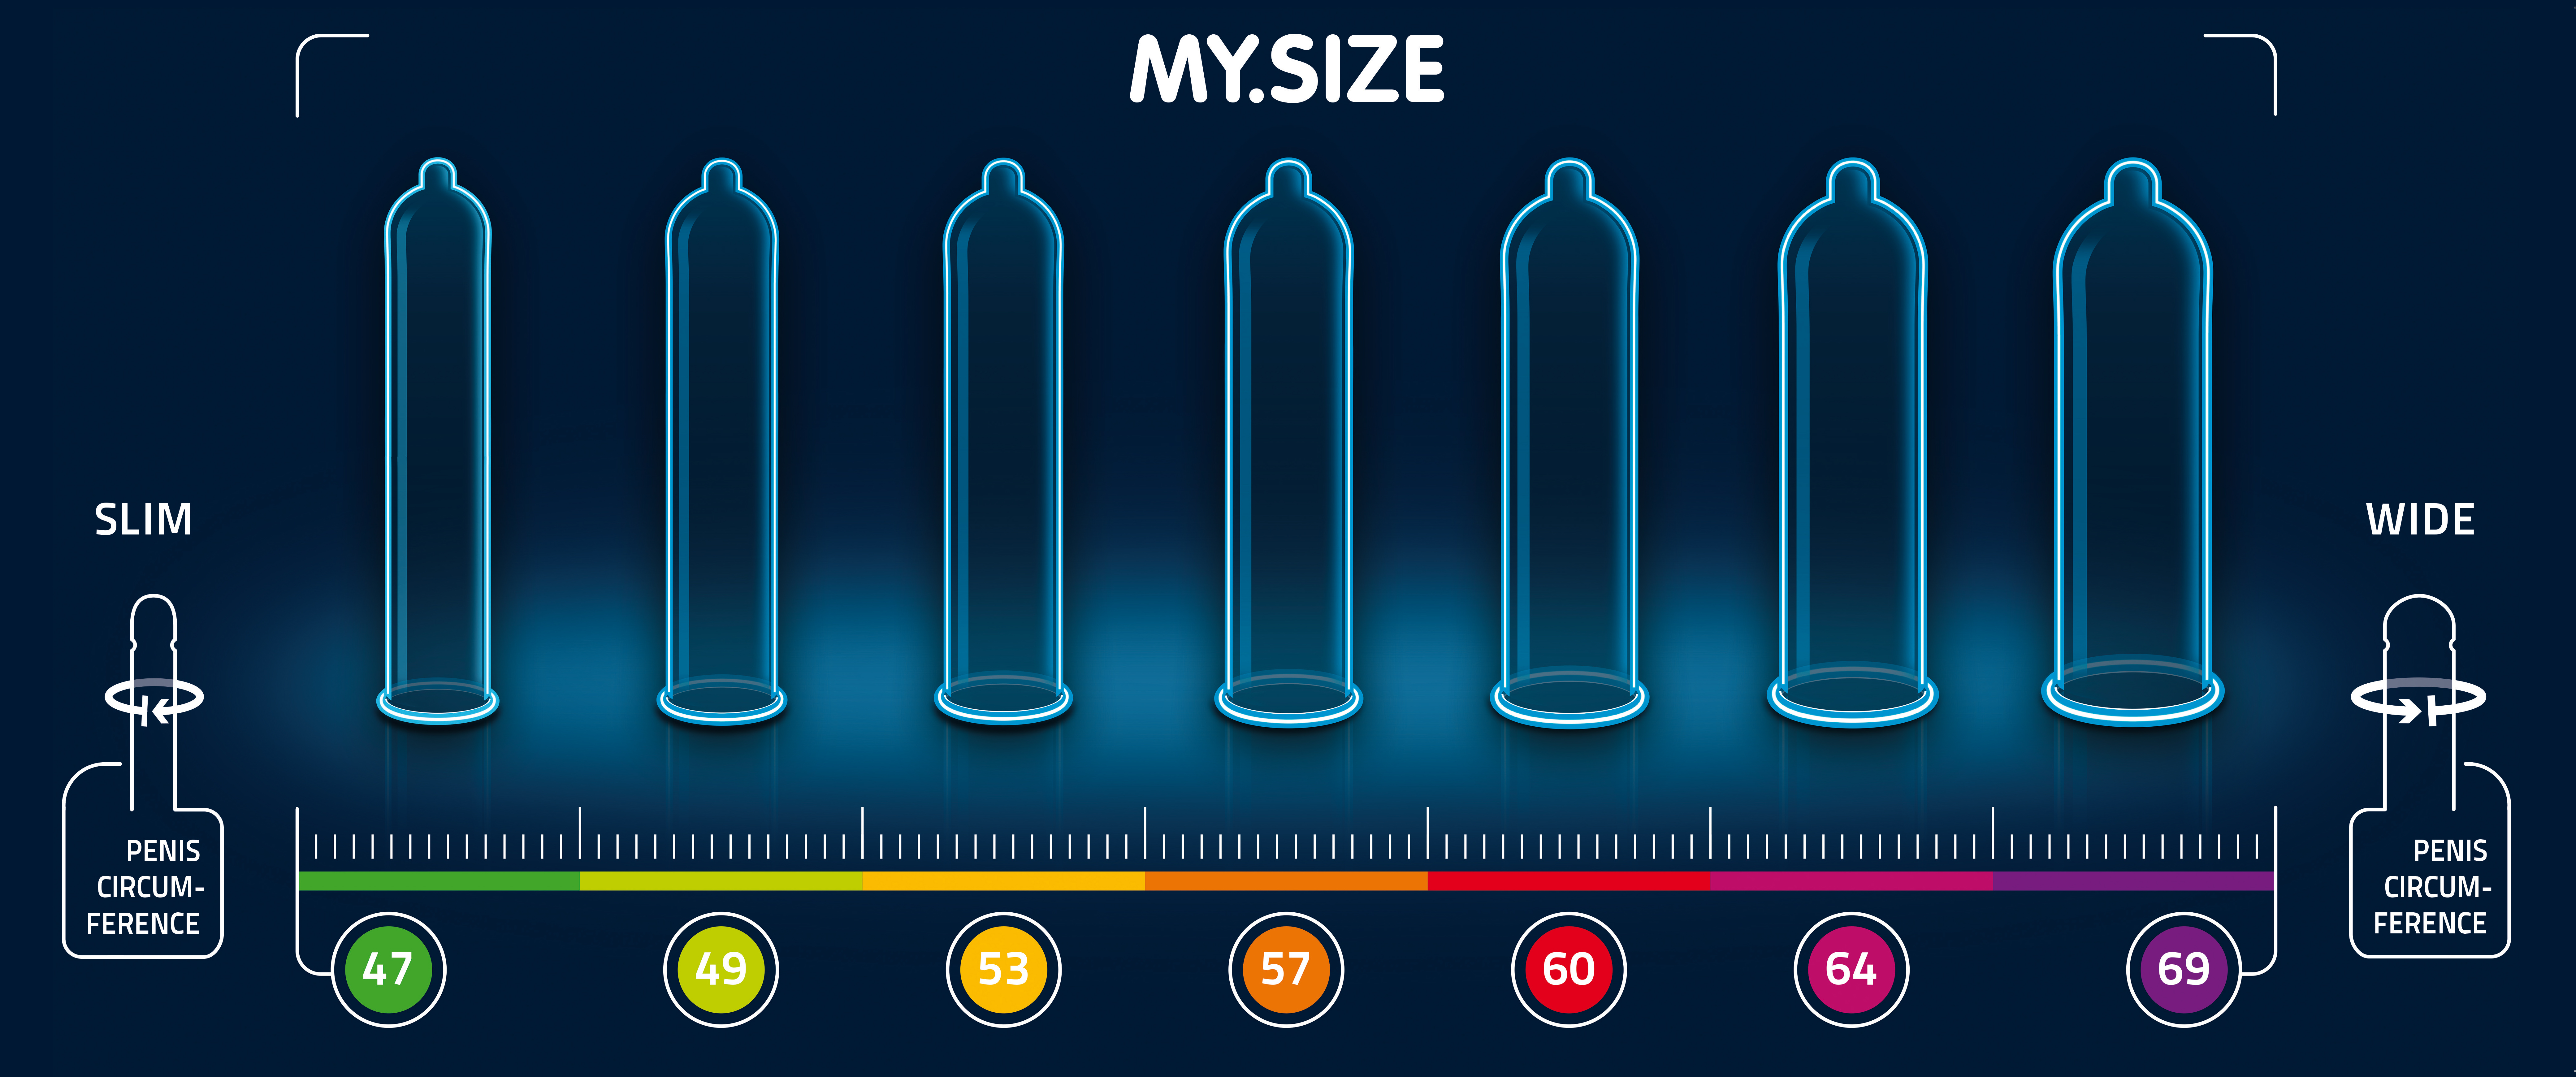 Why does the condom size matter?